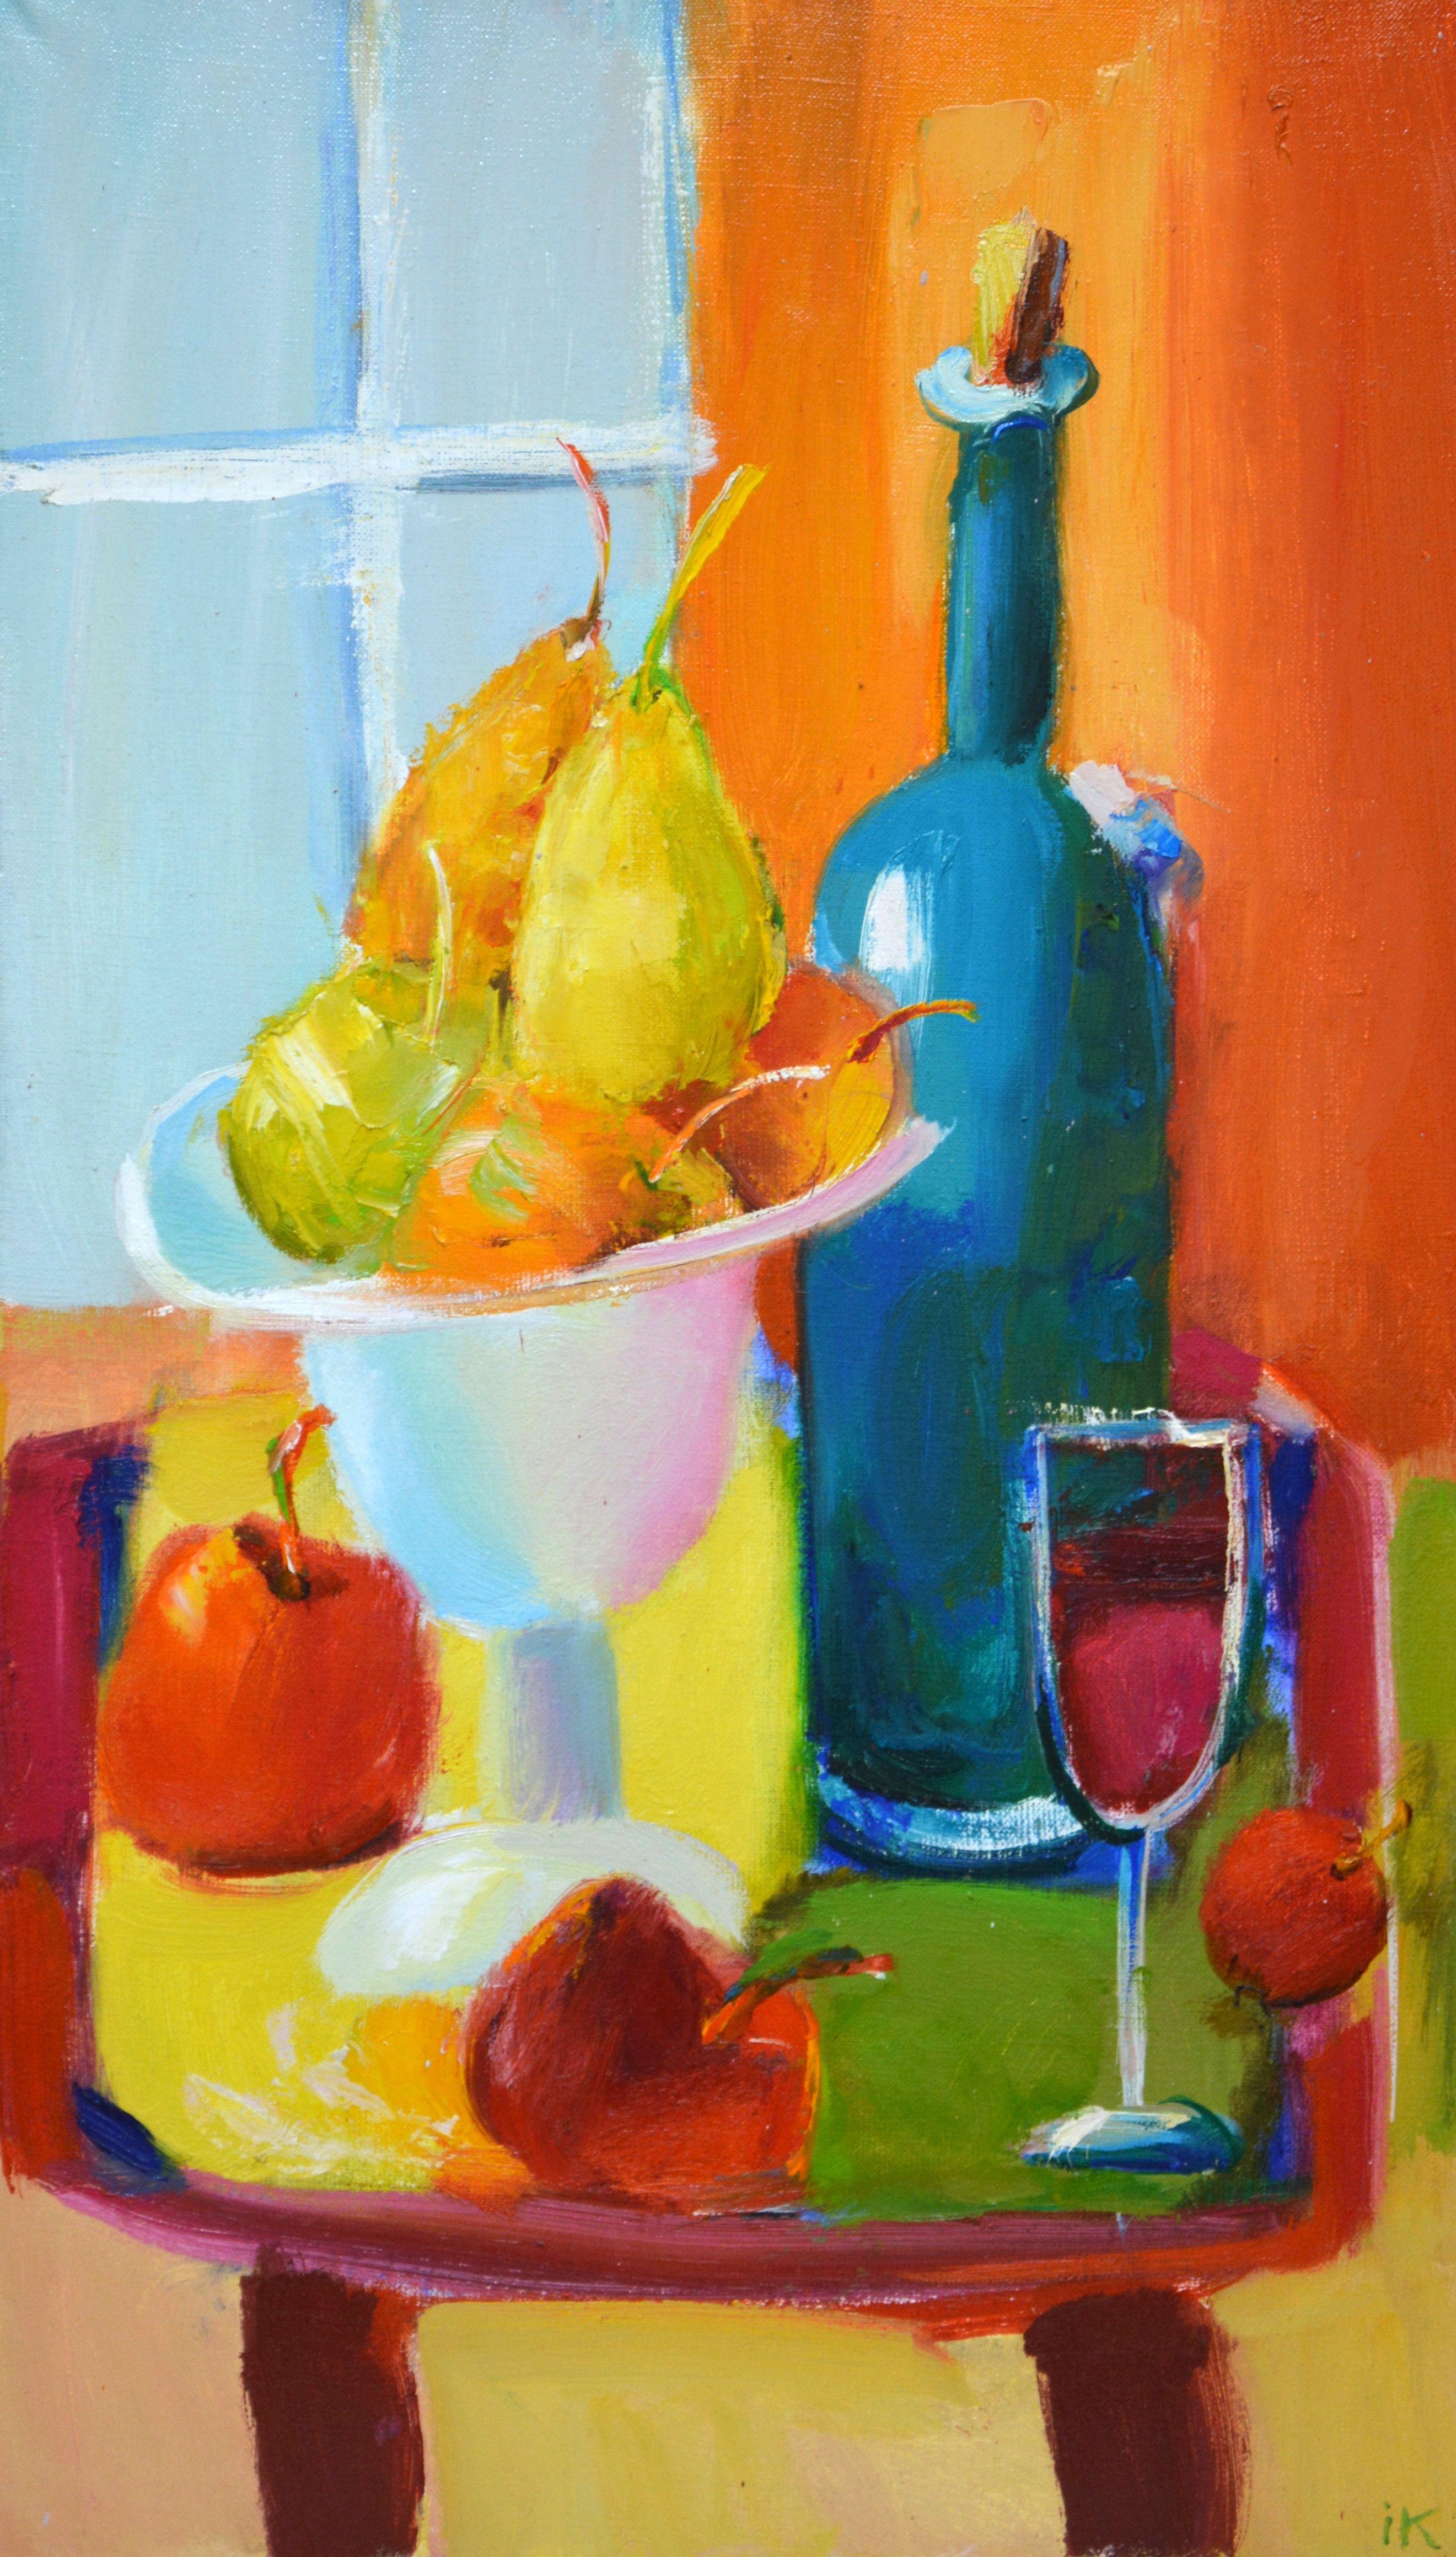 Modern, decorative still life in the kitchen, a bottle of wine, a glass, fruits on the table. Part of an ongoing series of colorful decorative still lifes. The picture has good spatial quality, and the bright colors are pleasing to the eyes.